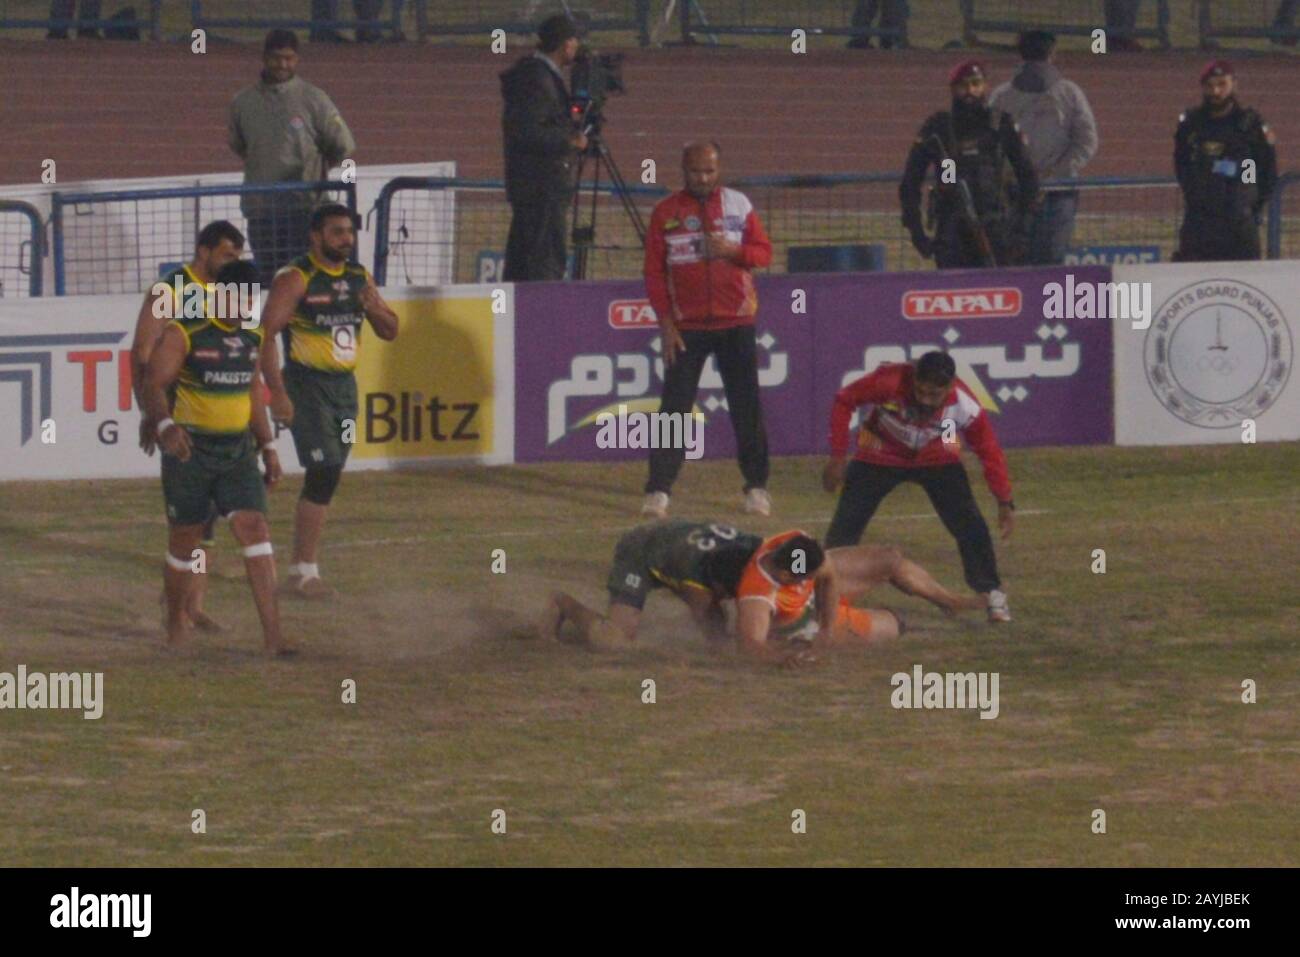 Lahore, Pakistan. 15th Feb, 2020. Kabaddi players seem in action during 2nd Semi final match playing between Pakistan and Iran, as Pakistan Kabaddi team win semi final match by 52-30 during Kabaddi World Cup 2020 at Punjab Stadium Lahore on February 15, 2020. Kabaddi World Cup 2020 begins in Pakistan. All is set for the 'Kabaddi World Cup 2020' being hosted in three cities Lahore, Faisalabad and Gujrat from February 09 to 16 February. Respectively the event is jointly organized by Punjab government, Sports Board Punjab (SBP) and Pakistan Kabaddi Federation (PKF). (Photo by Rana Sajid Hussain/P Stock Photo